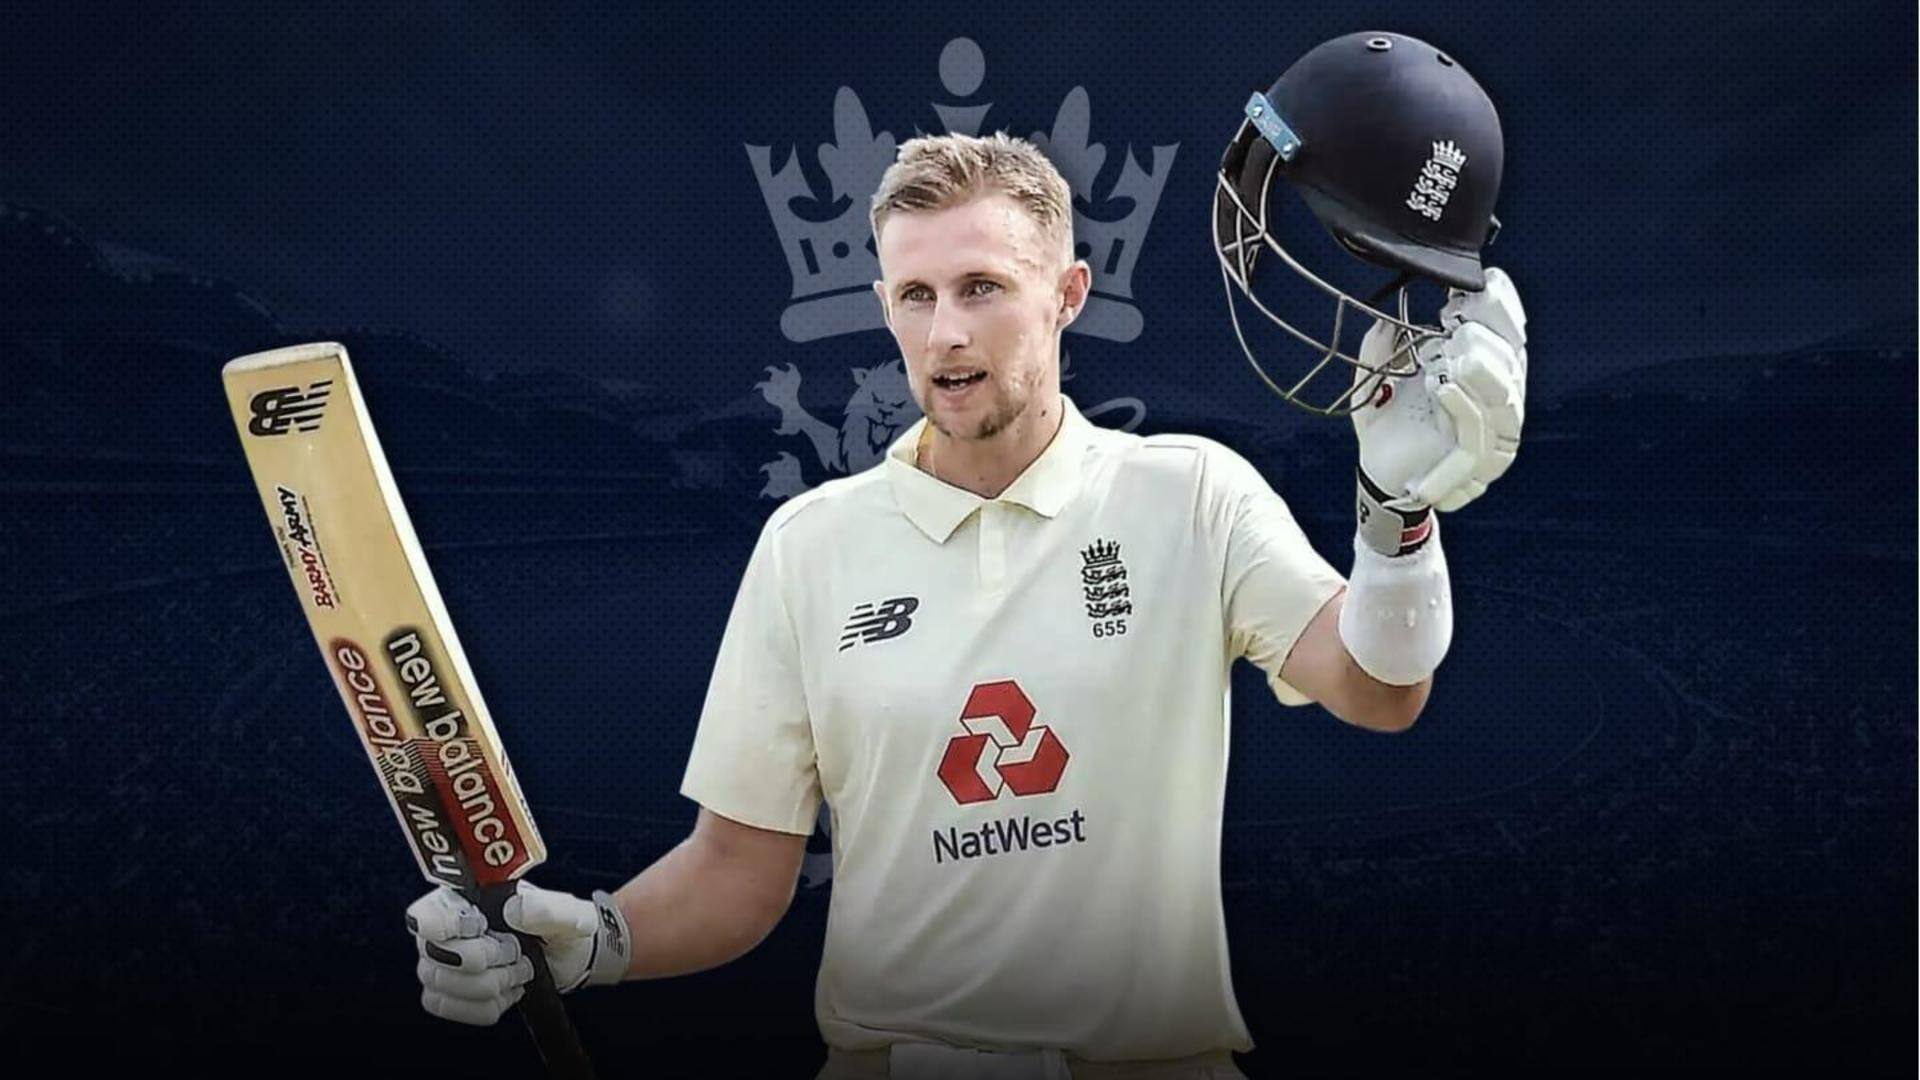 Joe Root set to complete 11,000 runs in Tests: Stats 